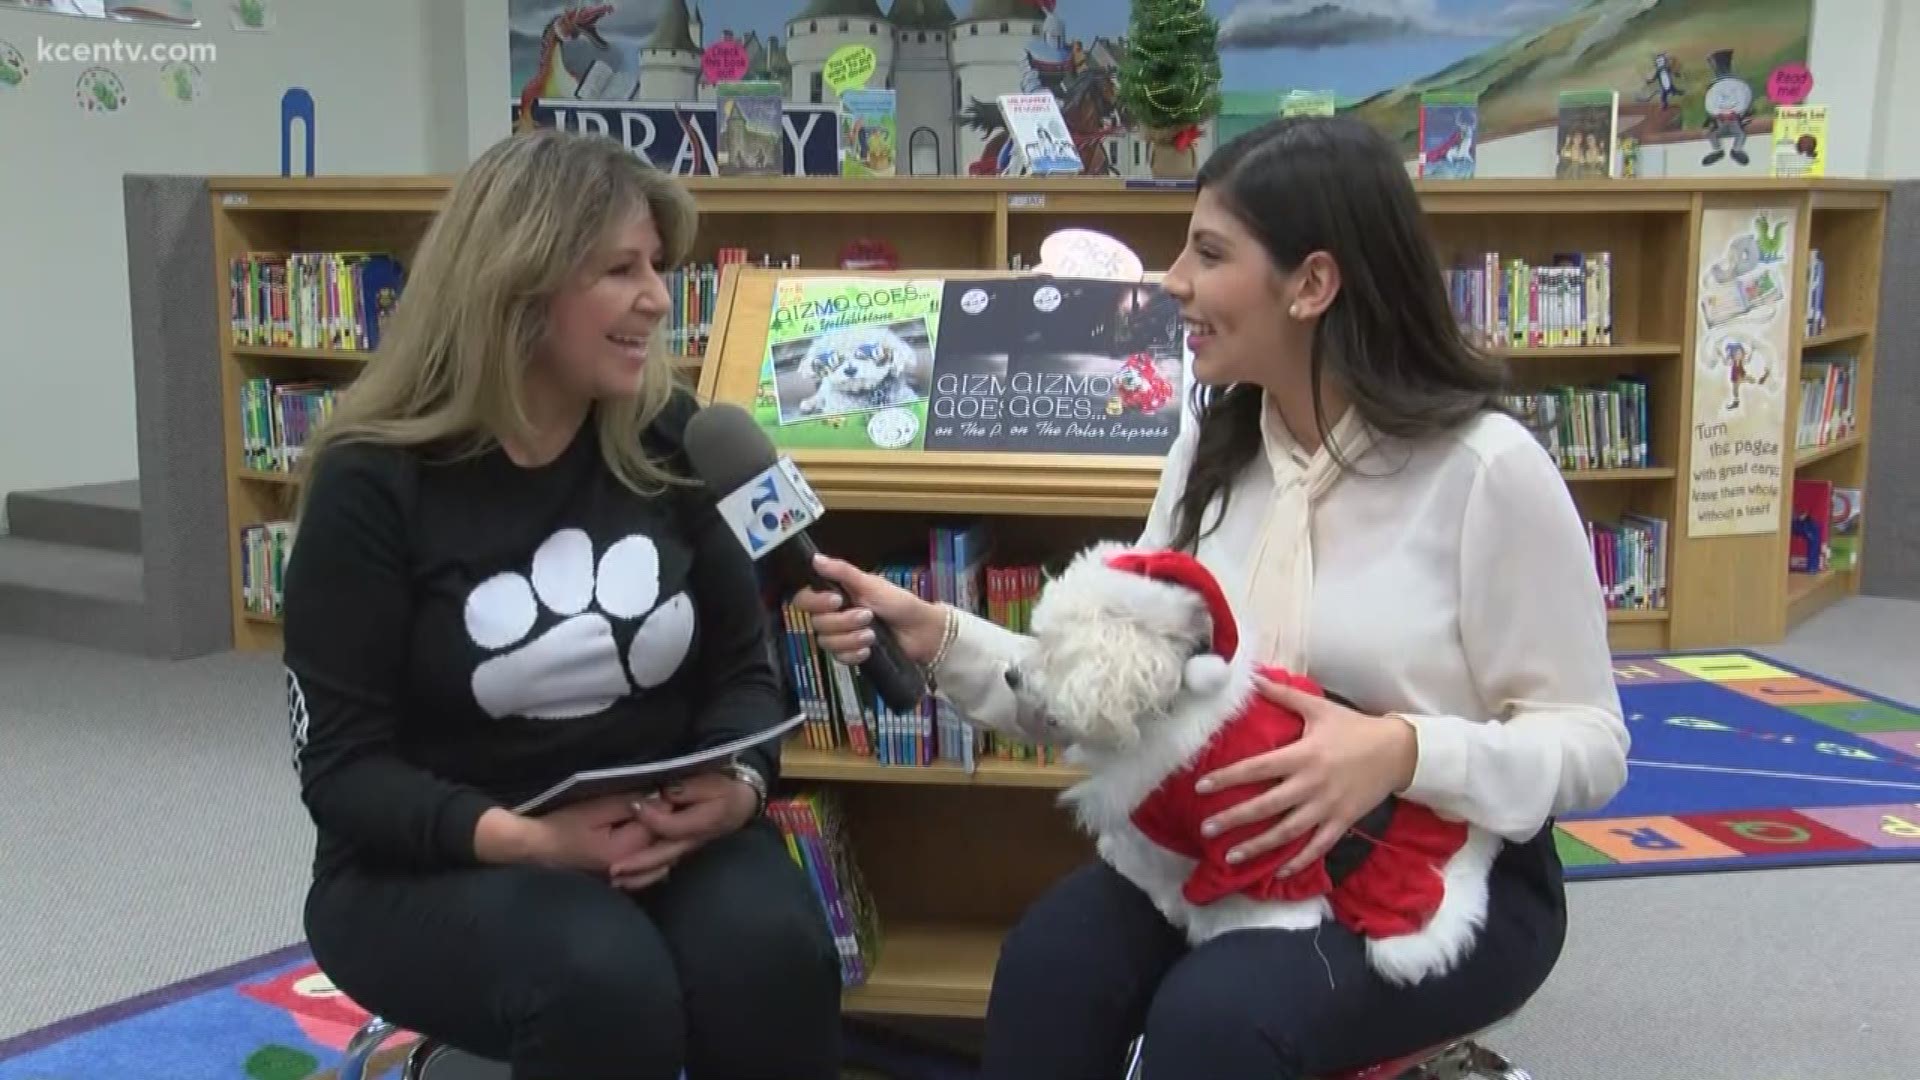 The author of the Gizmo Goes book series visits Williams Ledger Elementary school with her rescue pet, Gizmo.